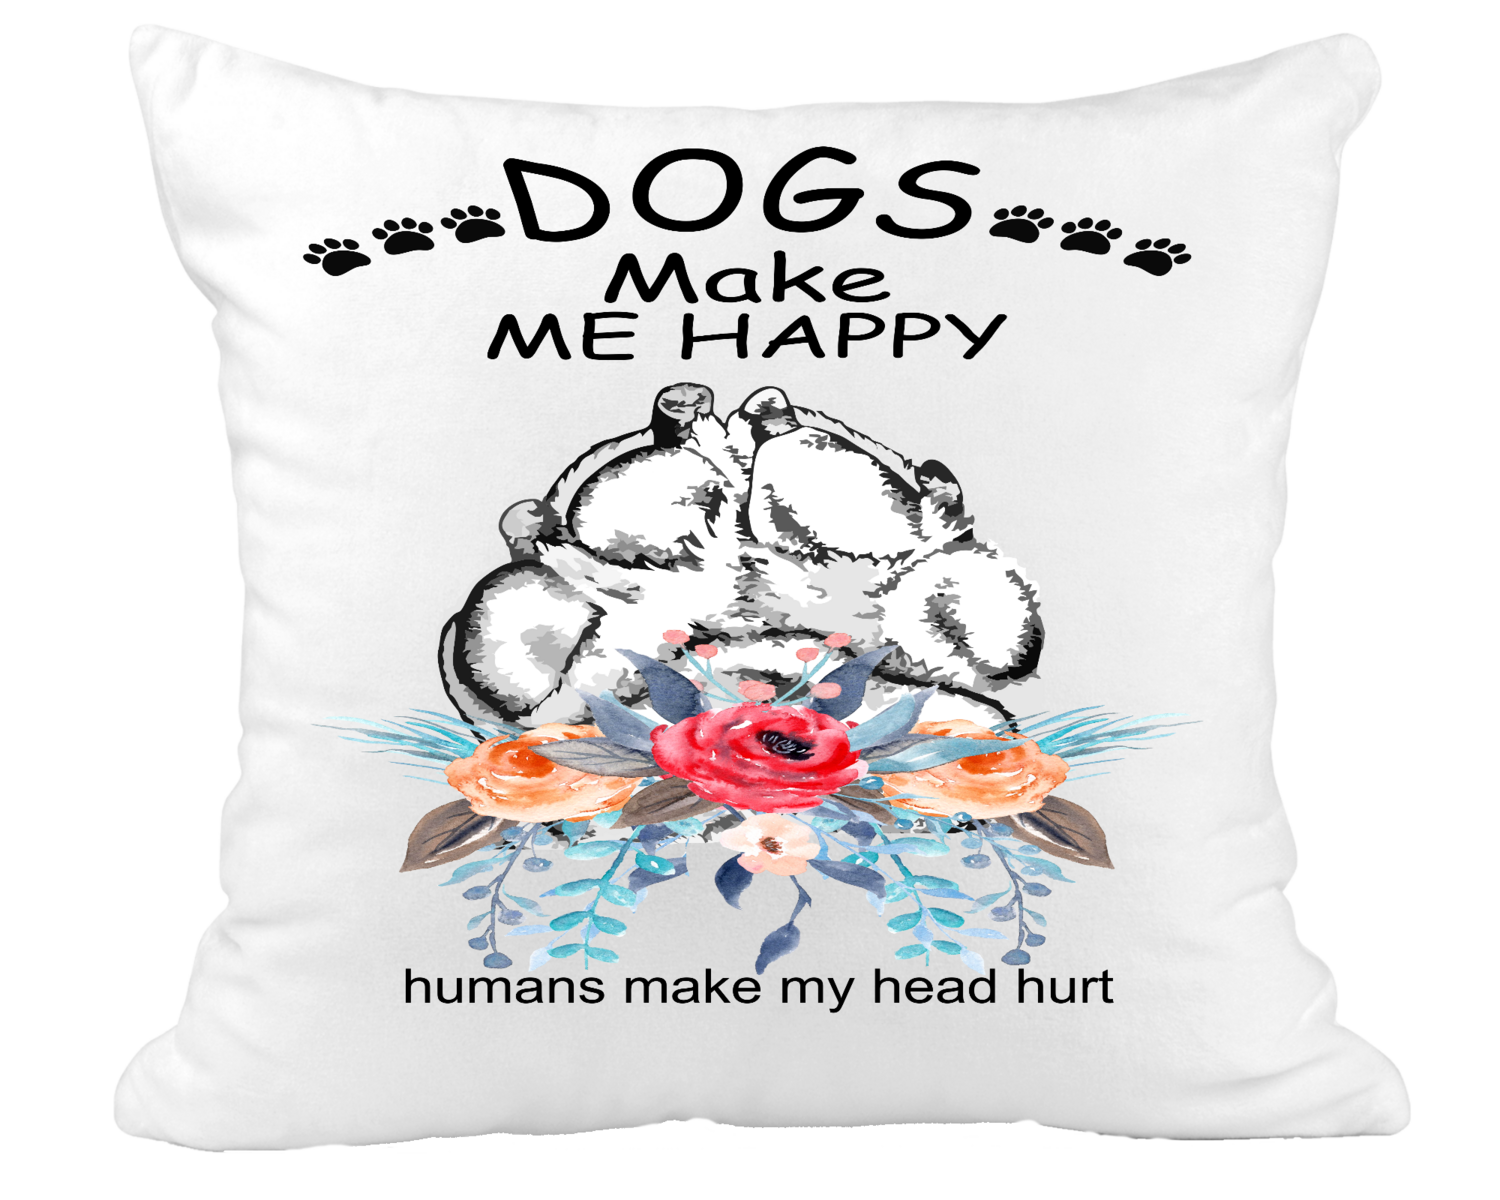 Pillow Suede Dog: DOGS MAKE ME HAPPY HUMANS MAKE MY HEAD HURT